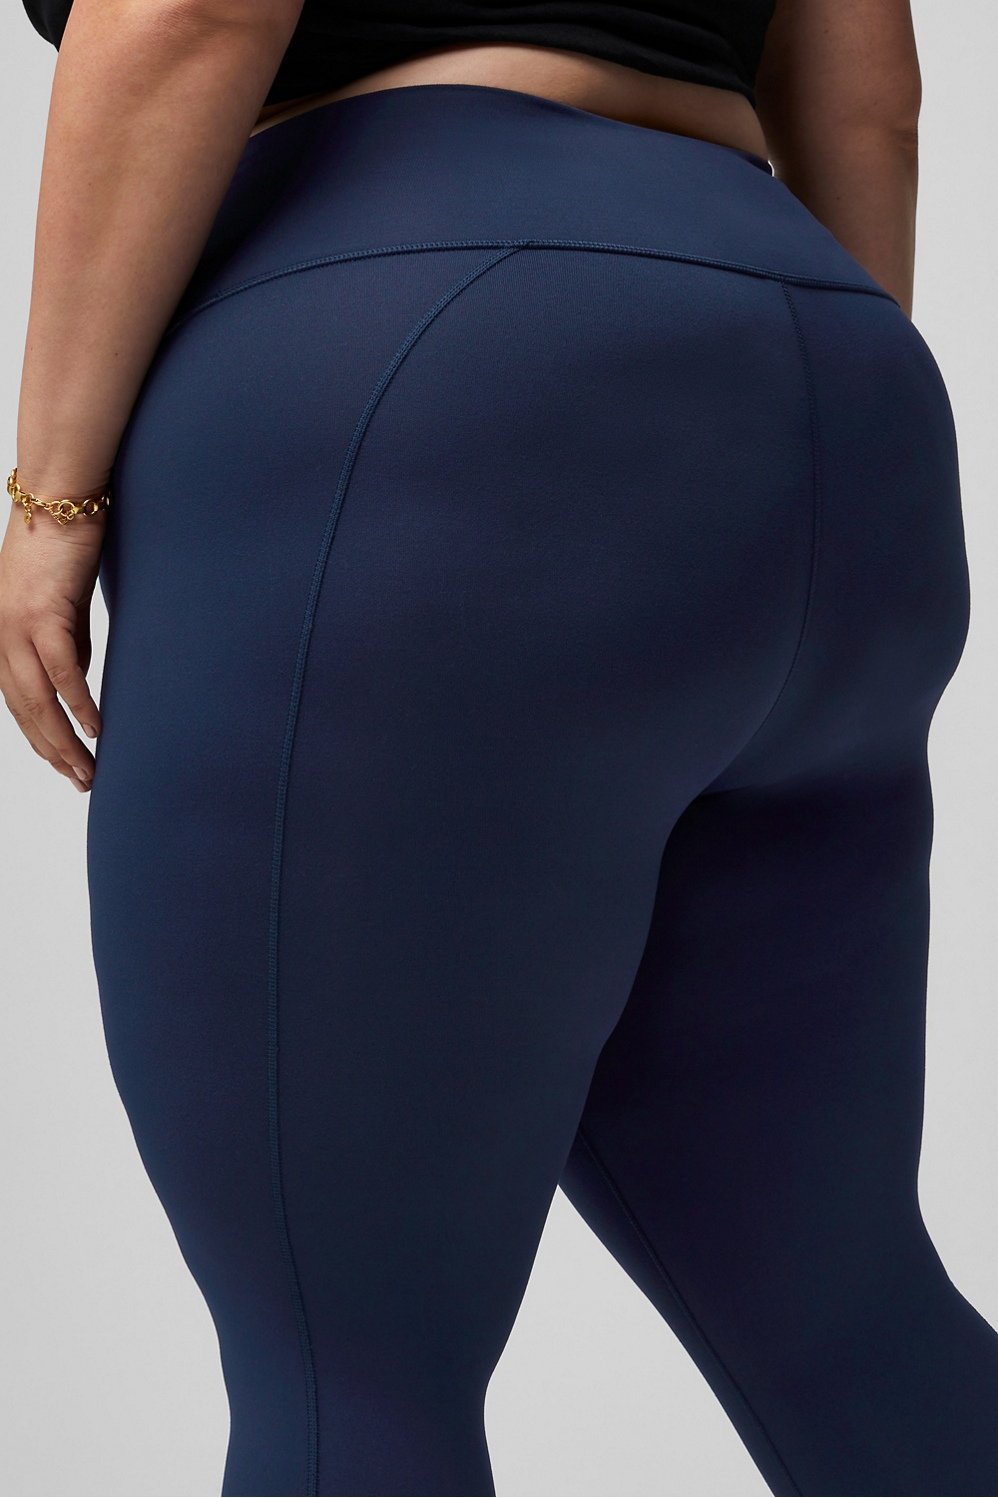 Fabletics Boost PowerHold Navy Blue Criss Cross Back High-Waisted 7/8  Leggings XS - $32 - From Erin